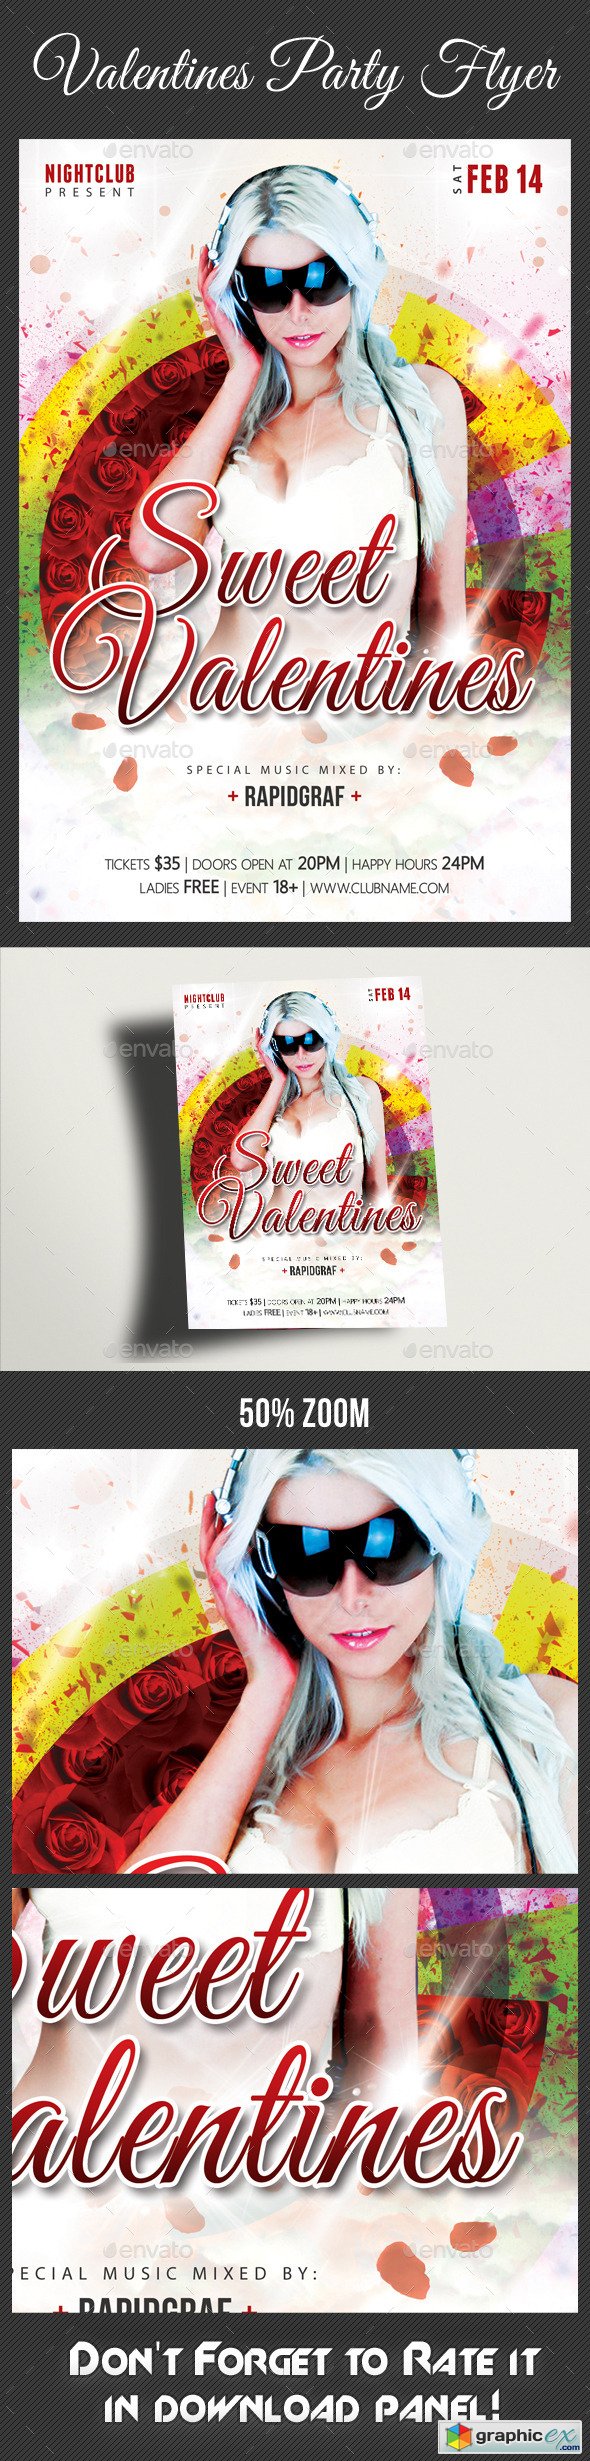 Valentines Day Party Flyer Template 02